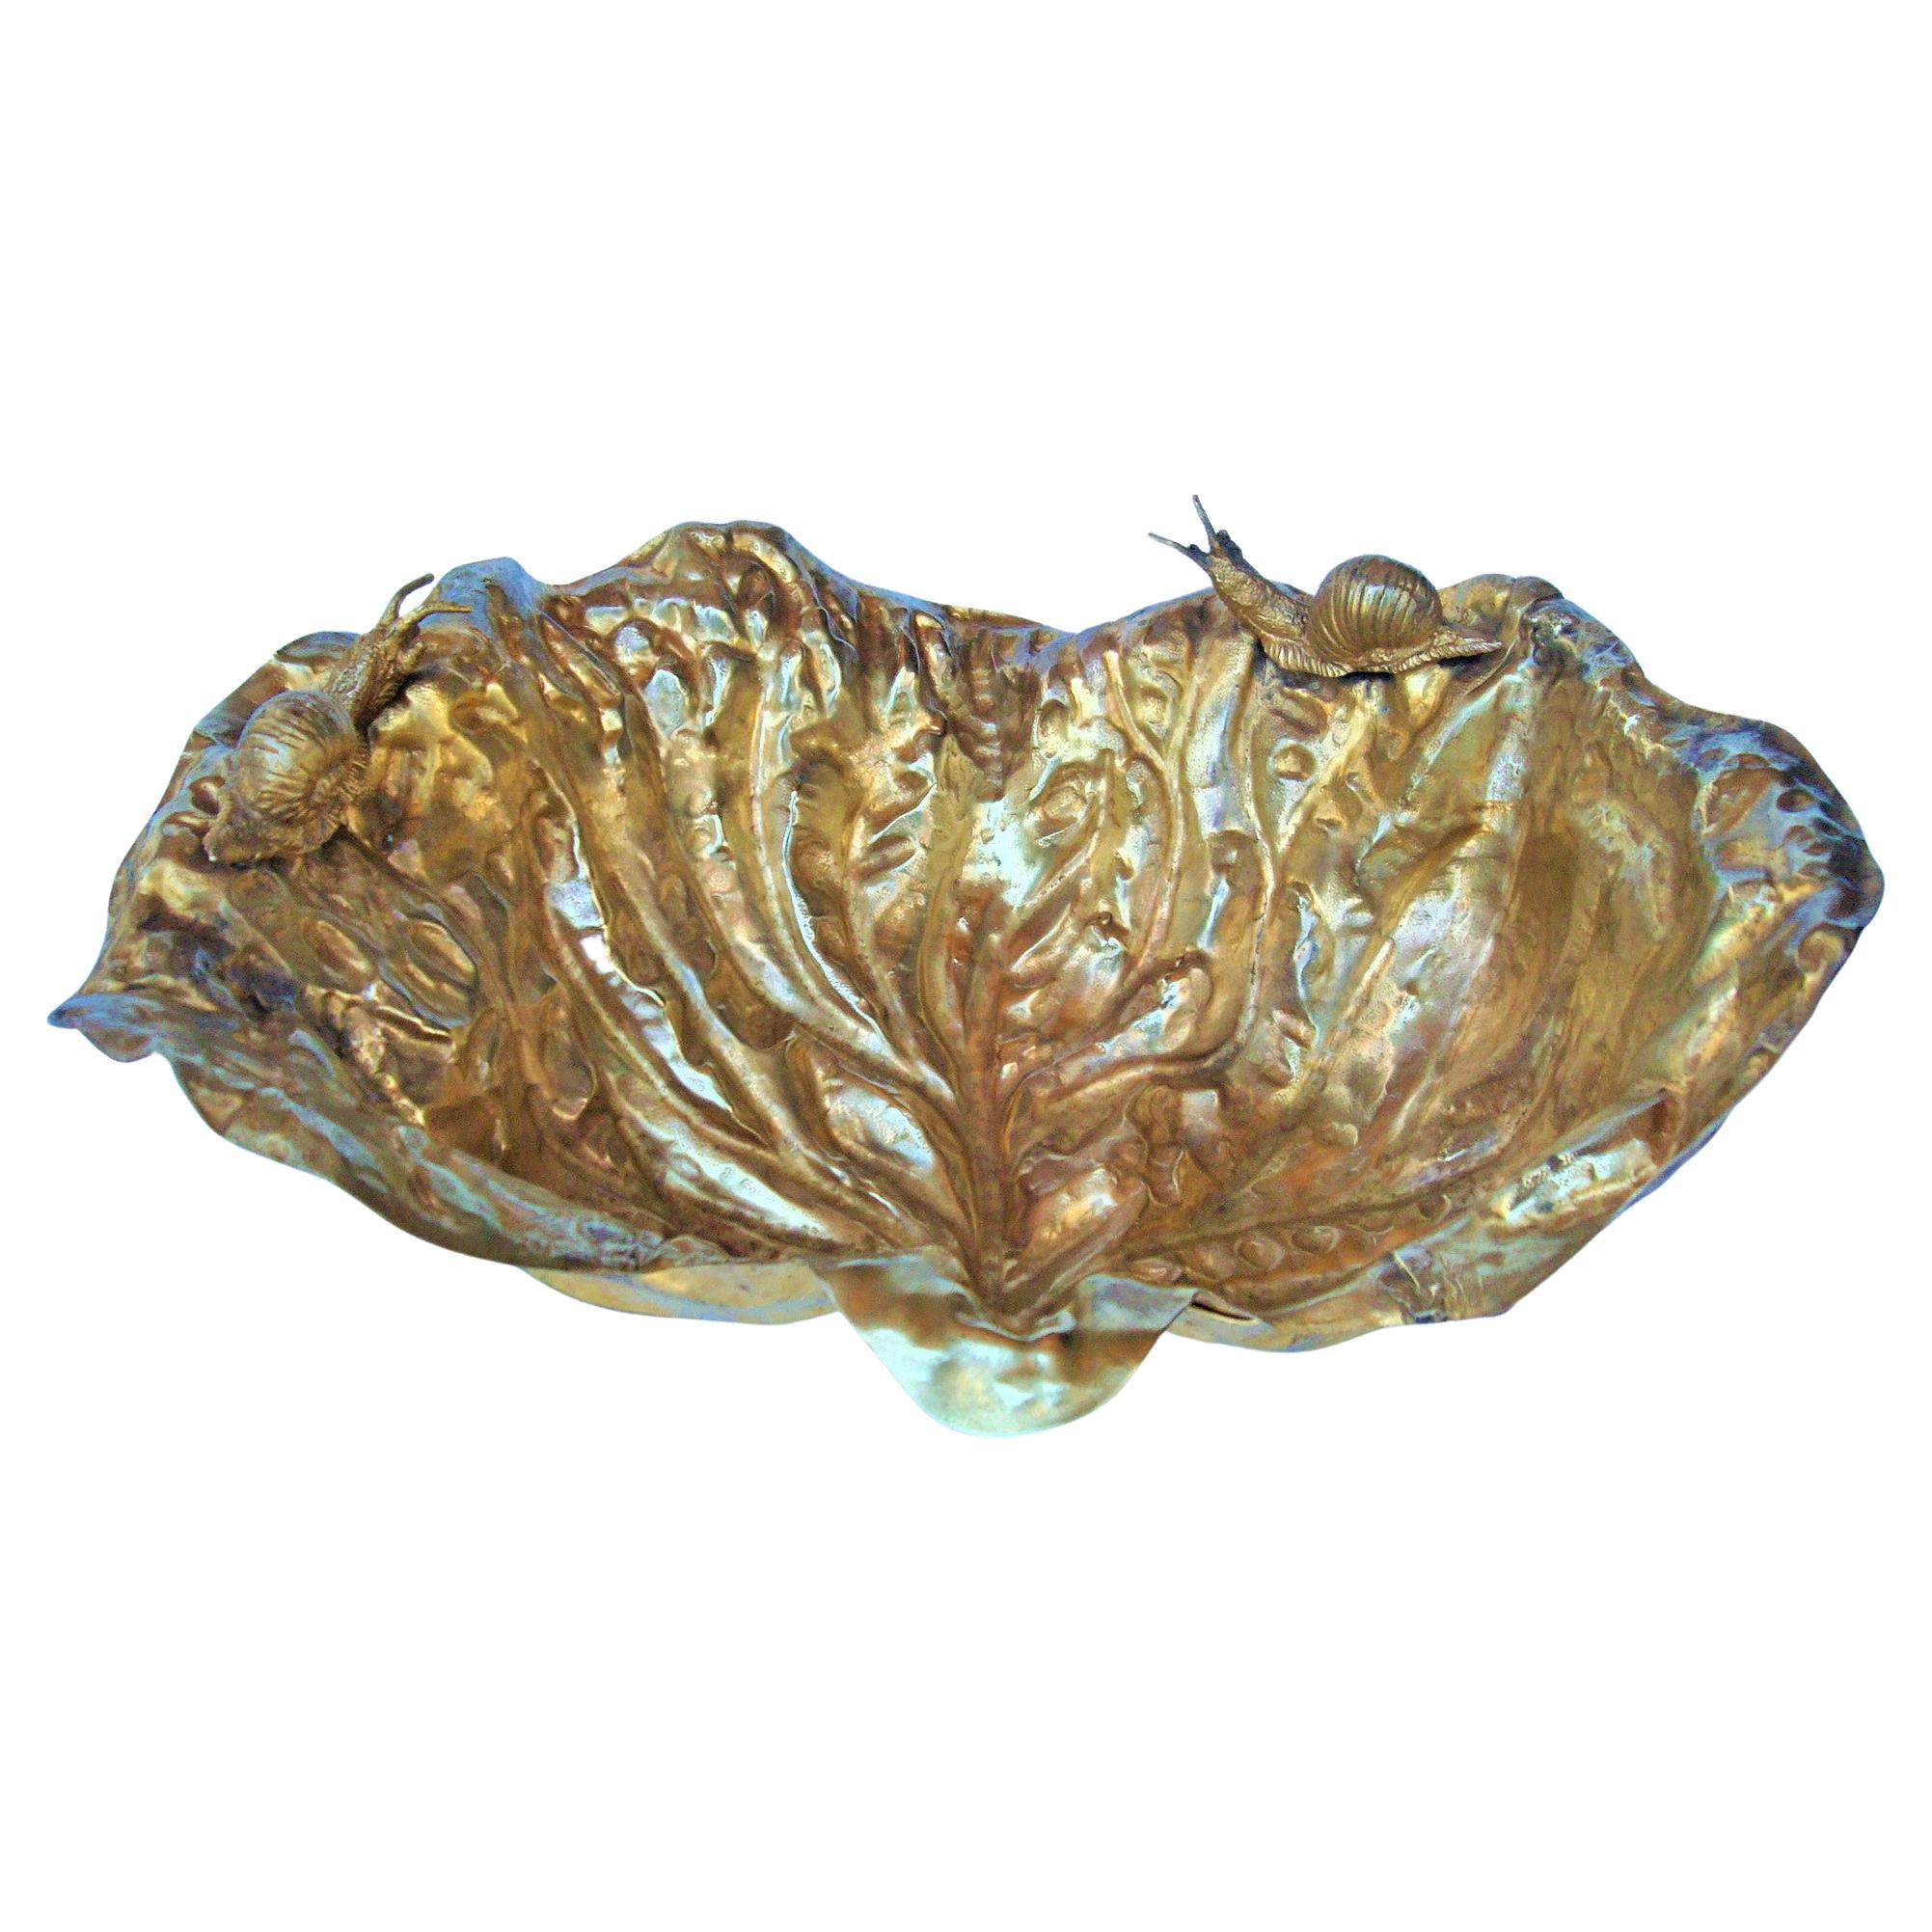 Leaf Bowl with Snails Designed by Gabriella Crespi for Christian Dior Home, 1970